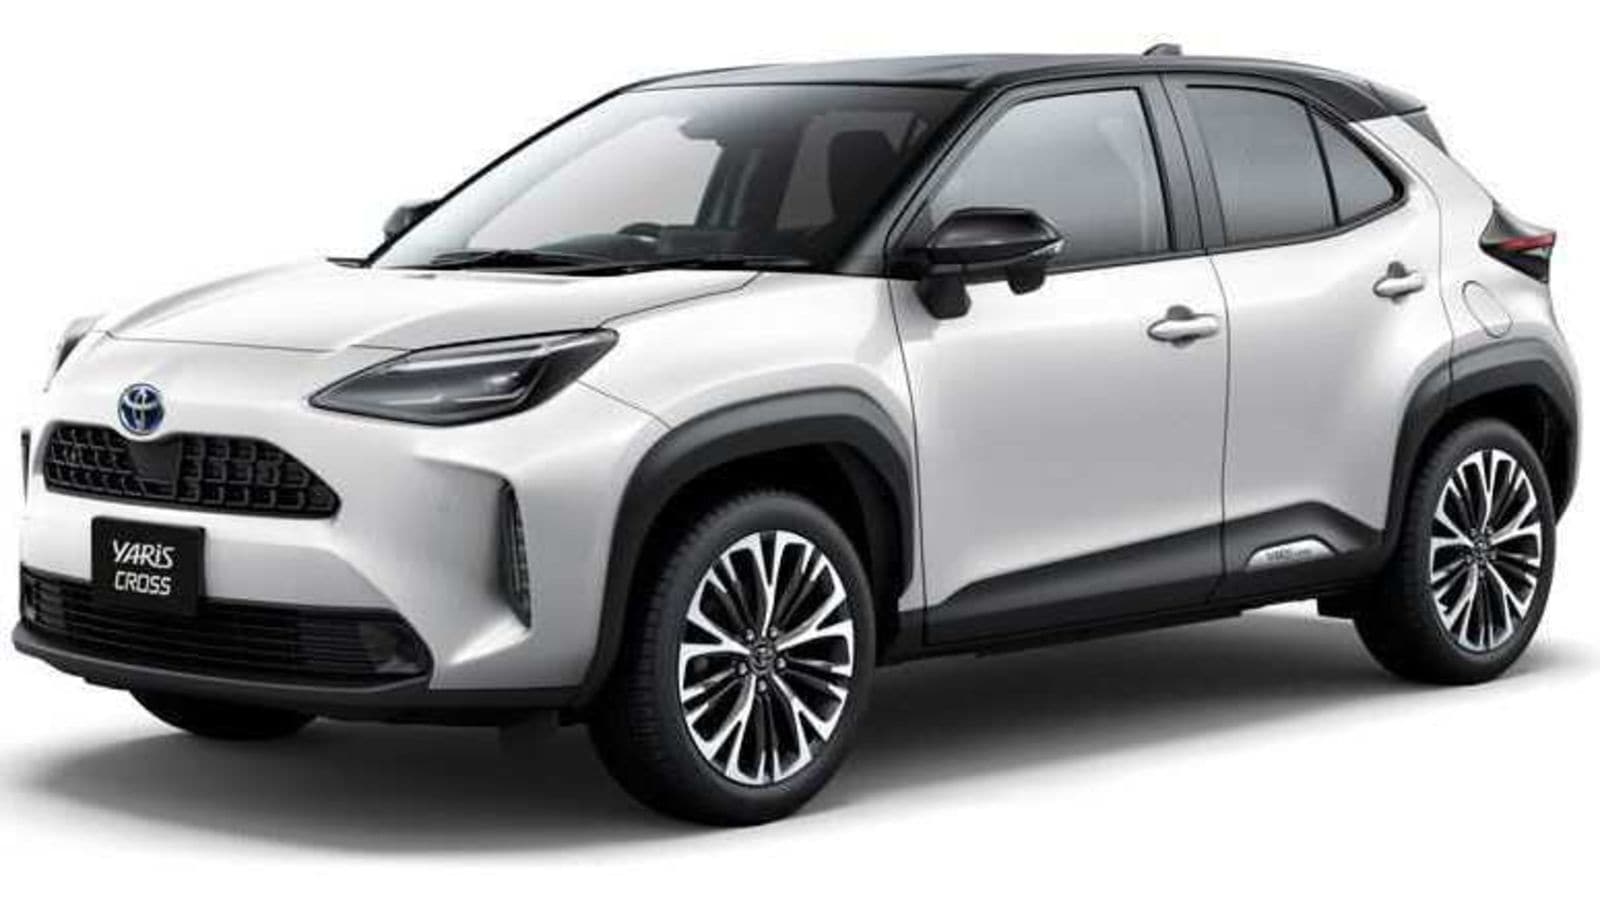 Toyota Launches New Yaris Cross Compact Suv With Hybrid Option Ht Auto